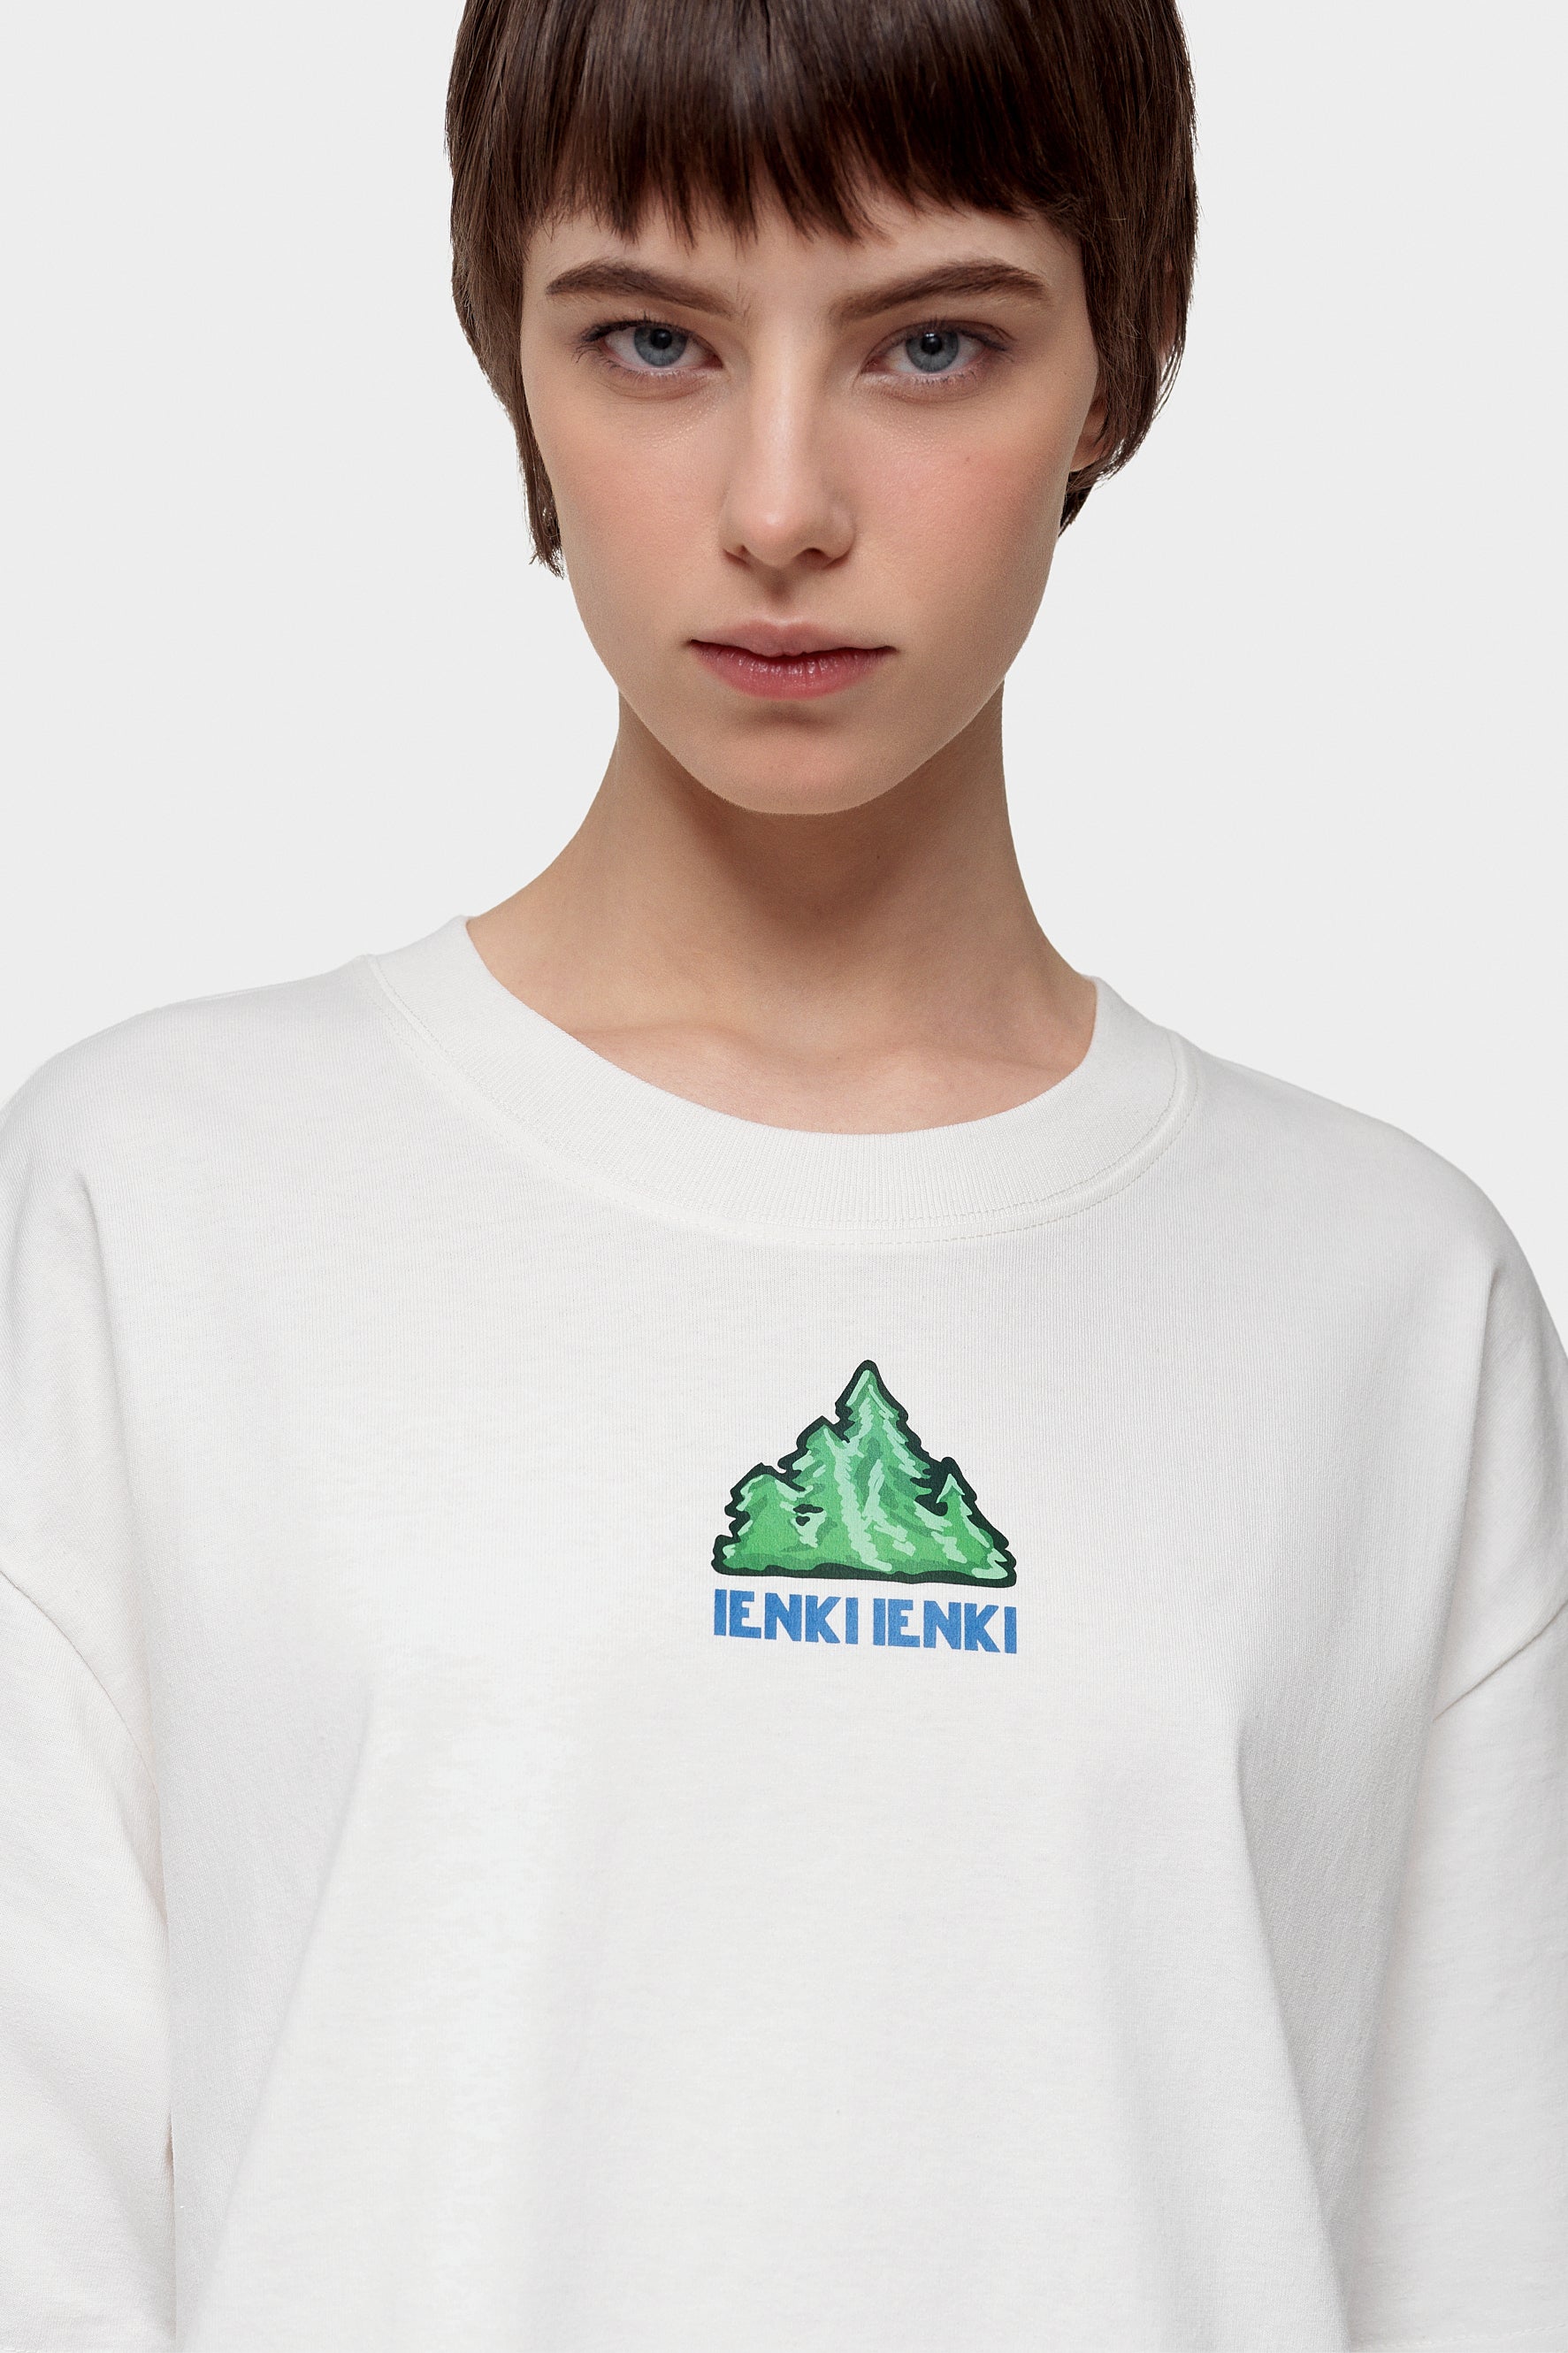 T-shirt White + Forest